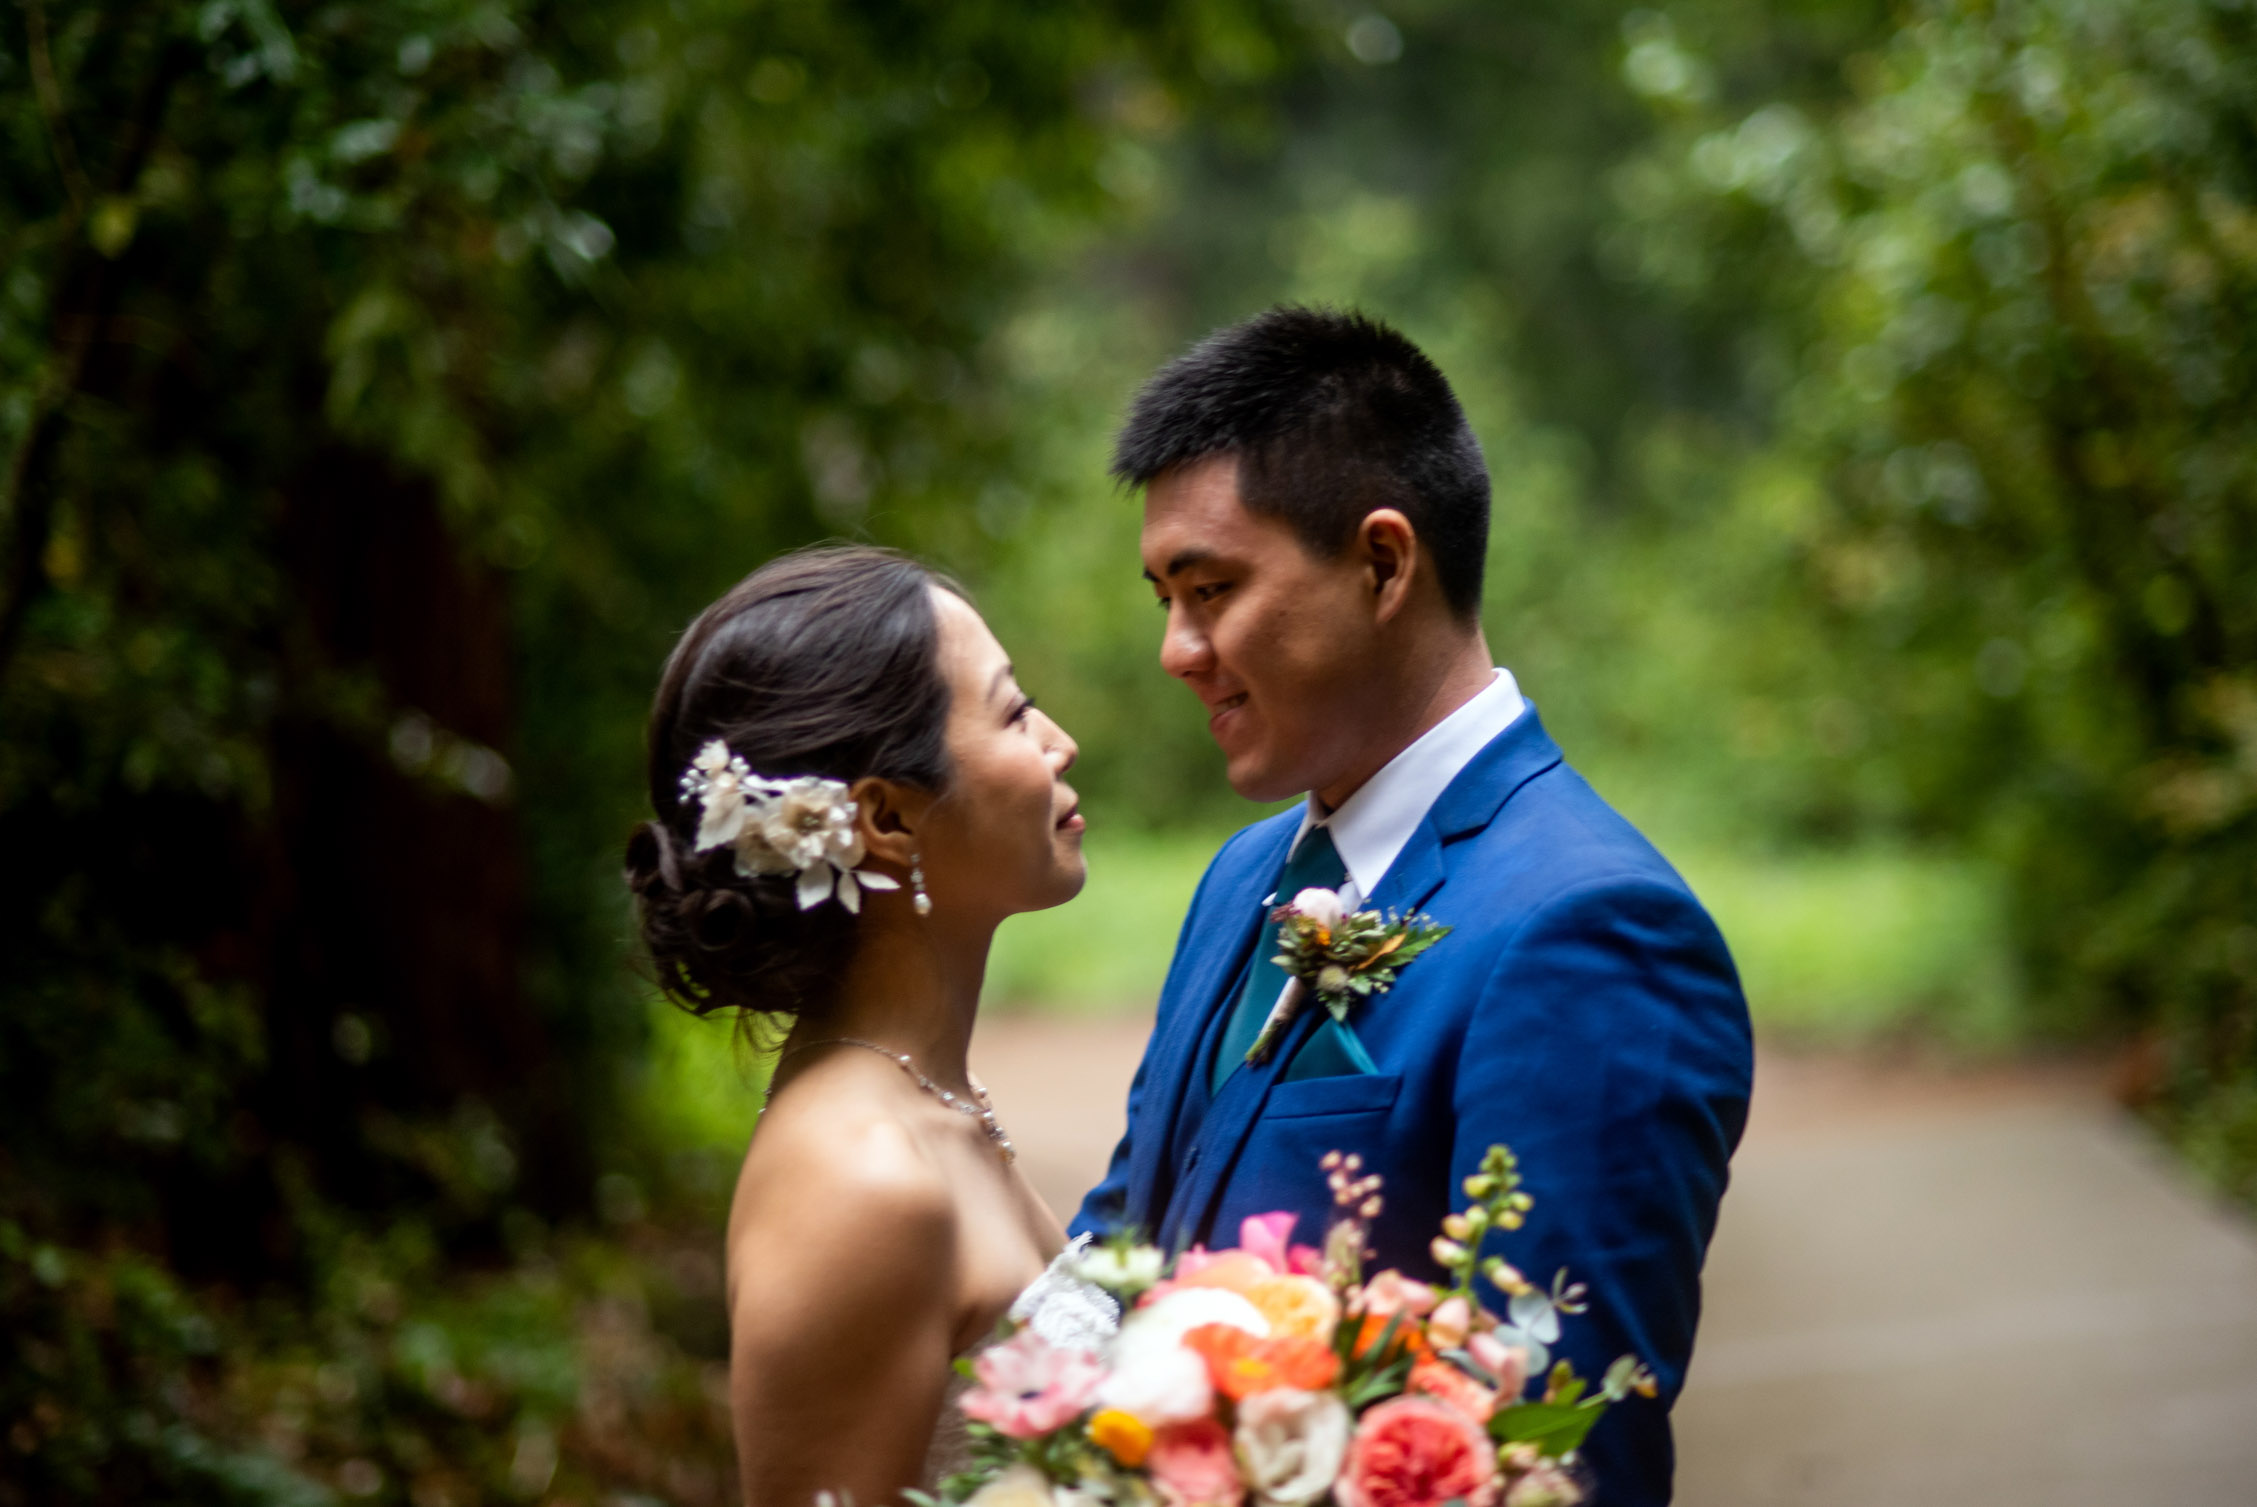 Bride and groom face to face in lush forest with flowers